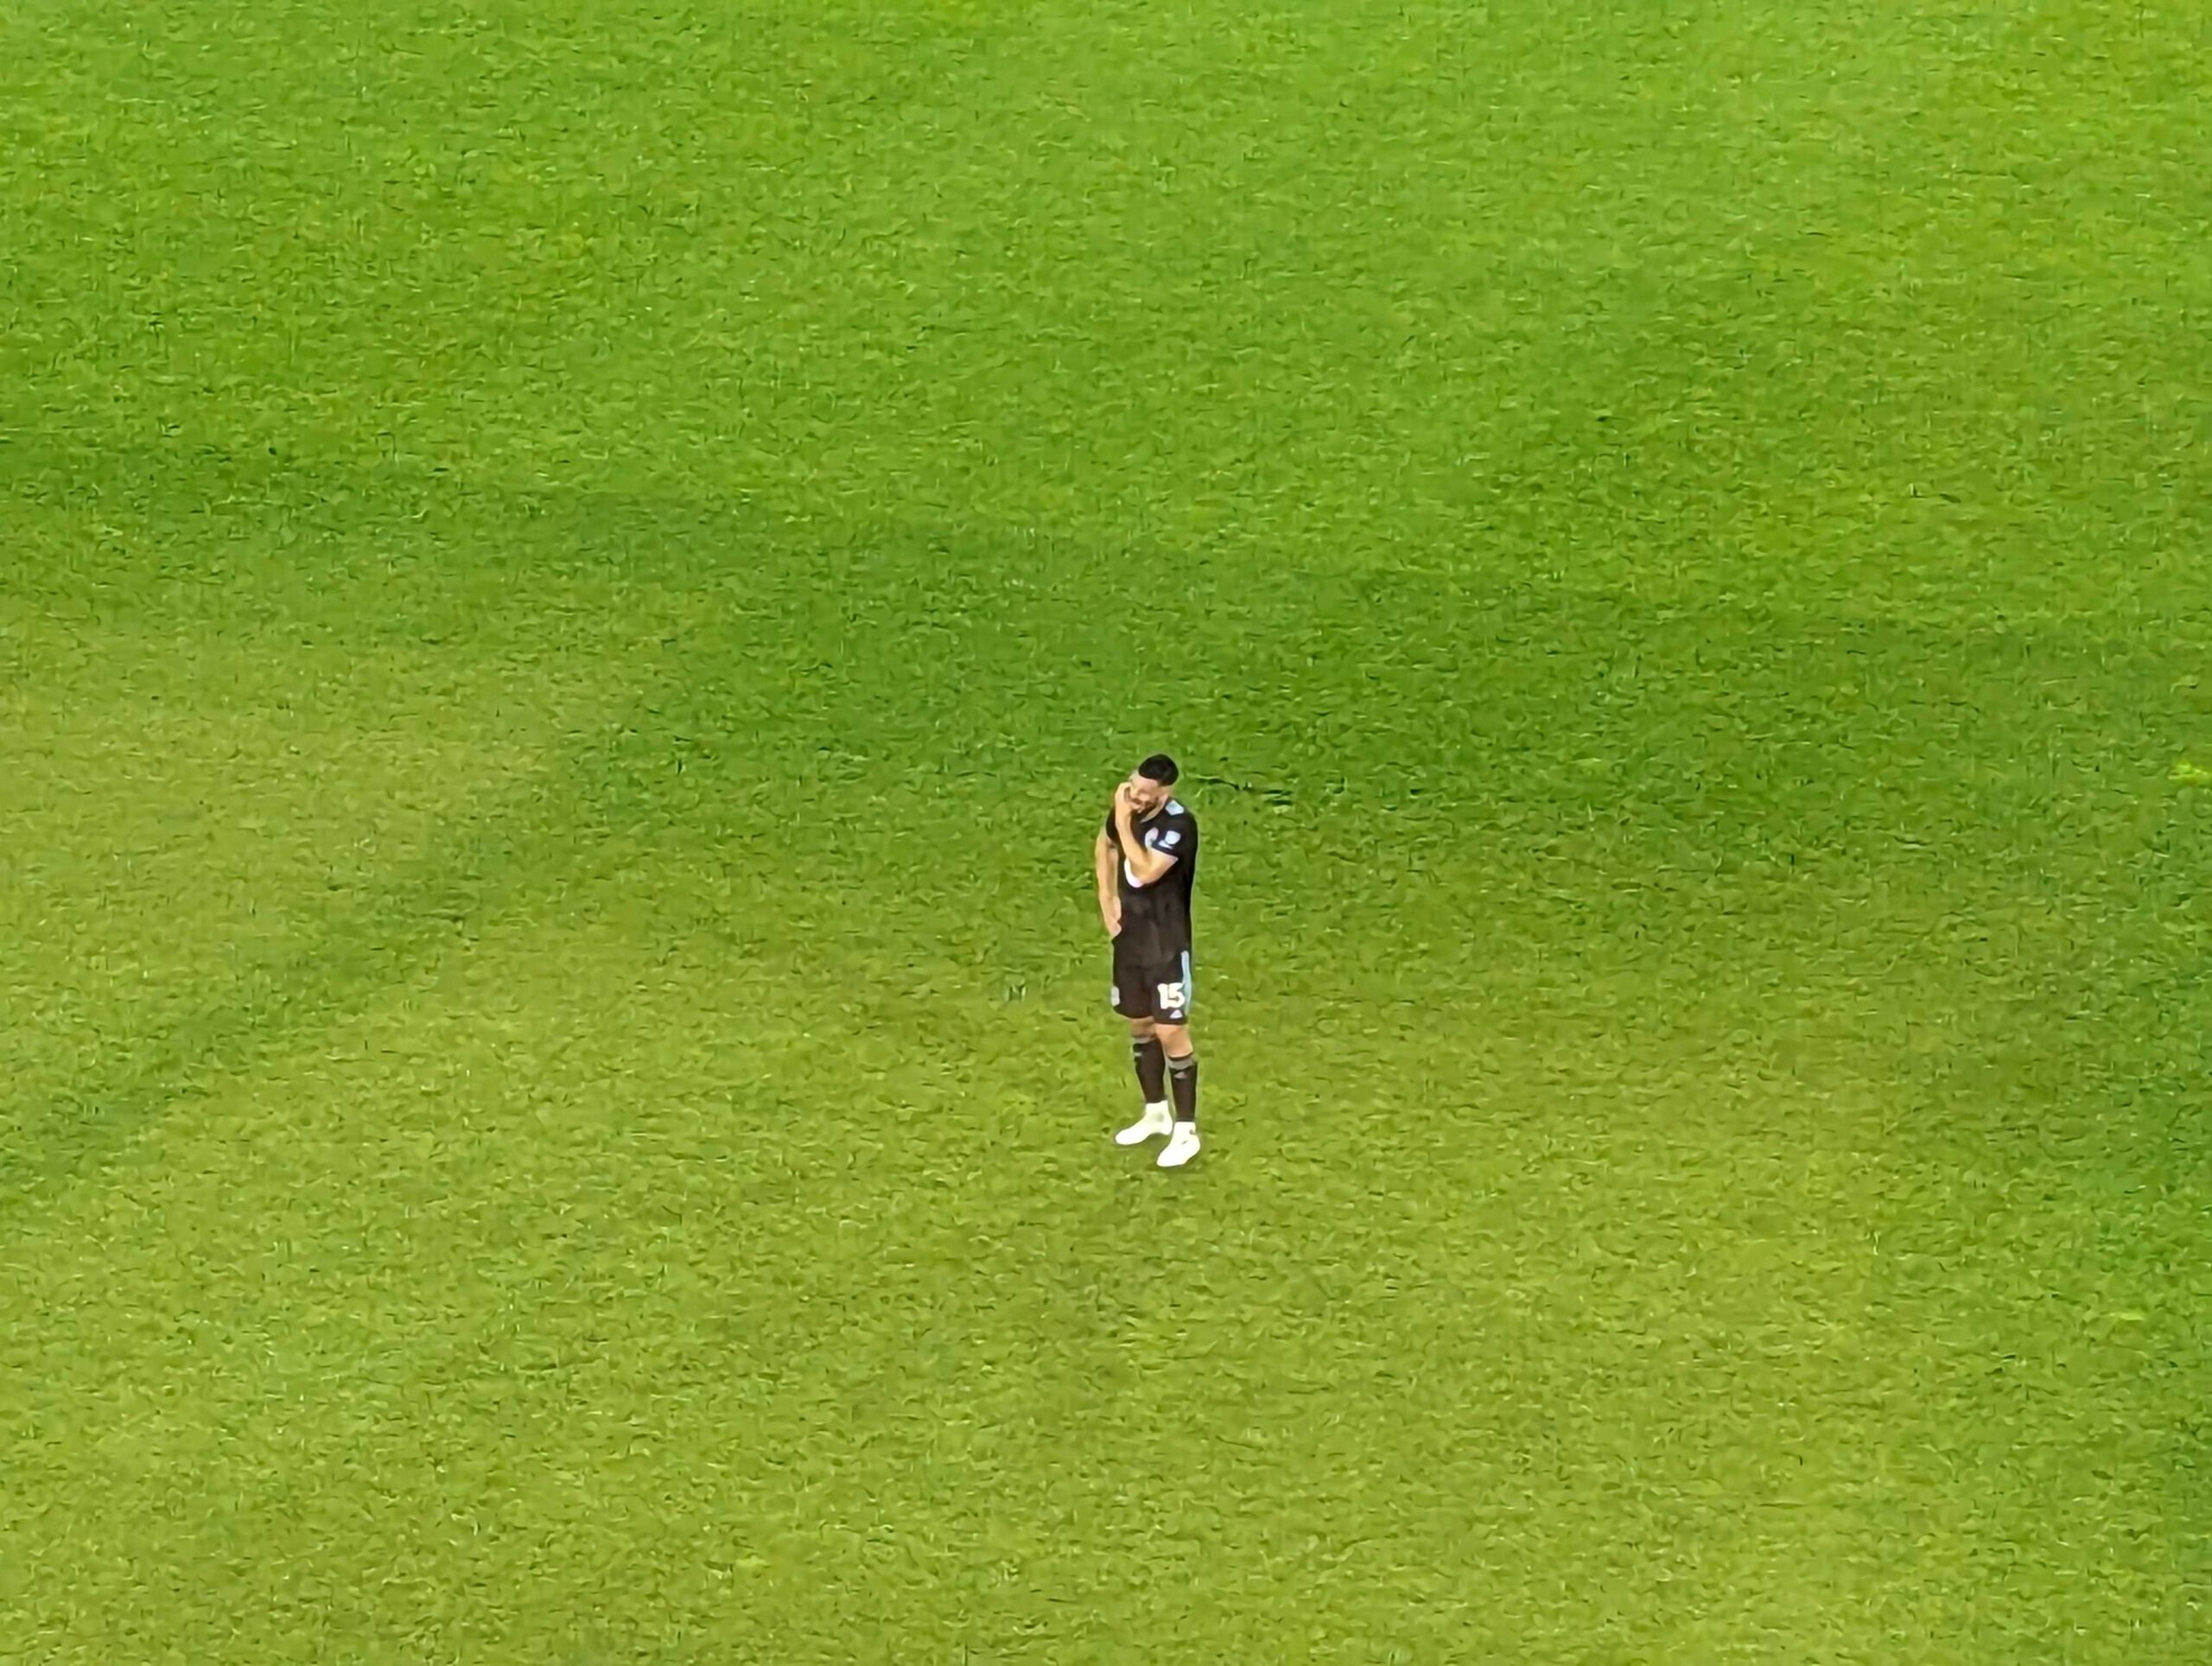 Michael Boxall stands alone on the Allianz Field pitch scratching his head.